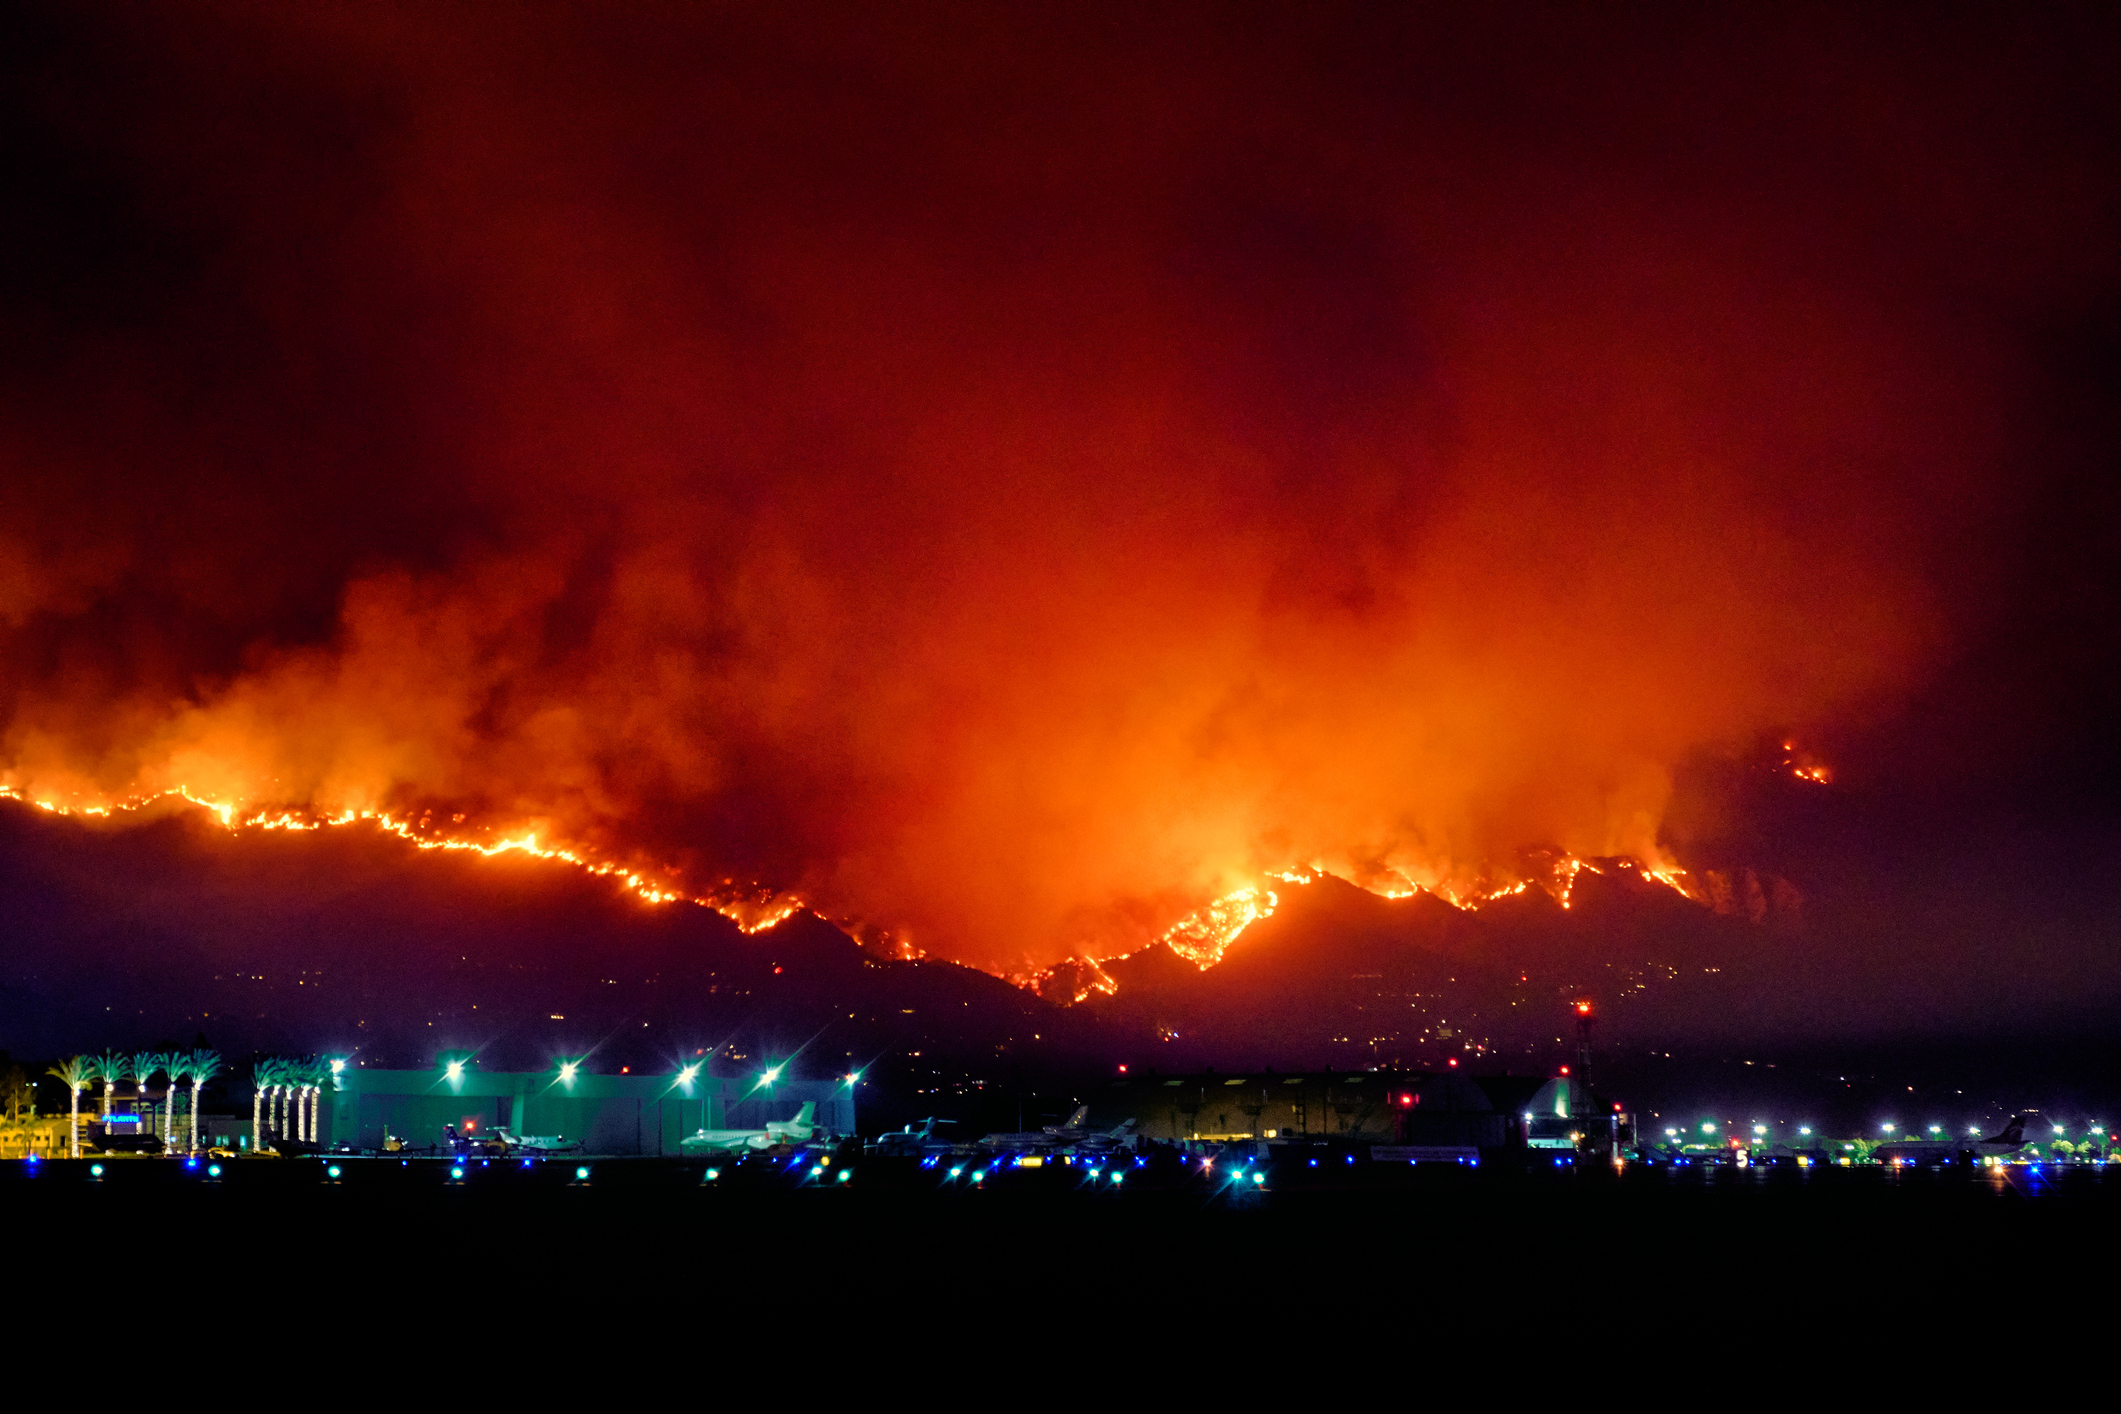 Los Angeles&#039; largest wildfire to date, which burned more than 7,000 acres in the Verdugo Mountains area